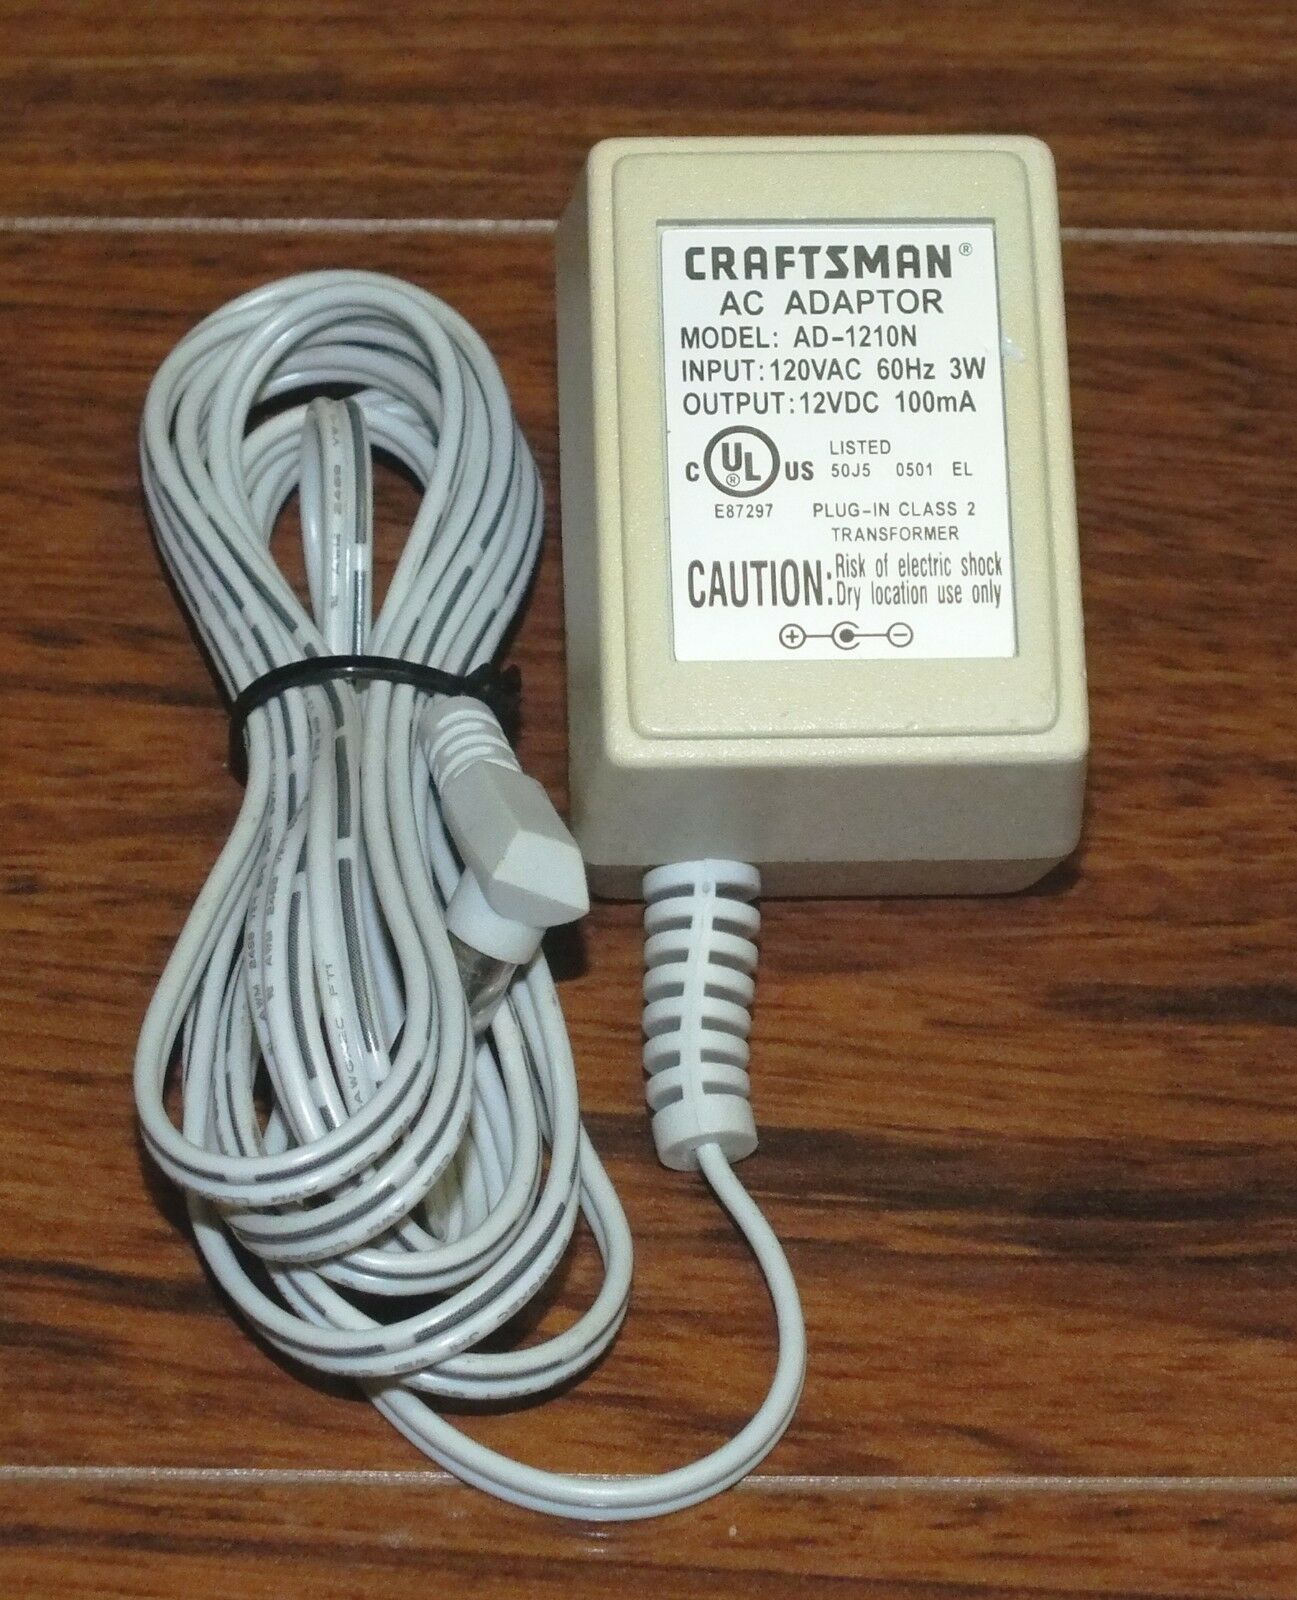 New 12V DC 100mA Craftsman AD-1210N Class 2 Transformer Ac Adapter - Click Image to Close